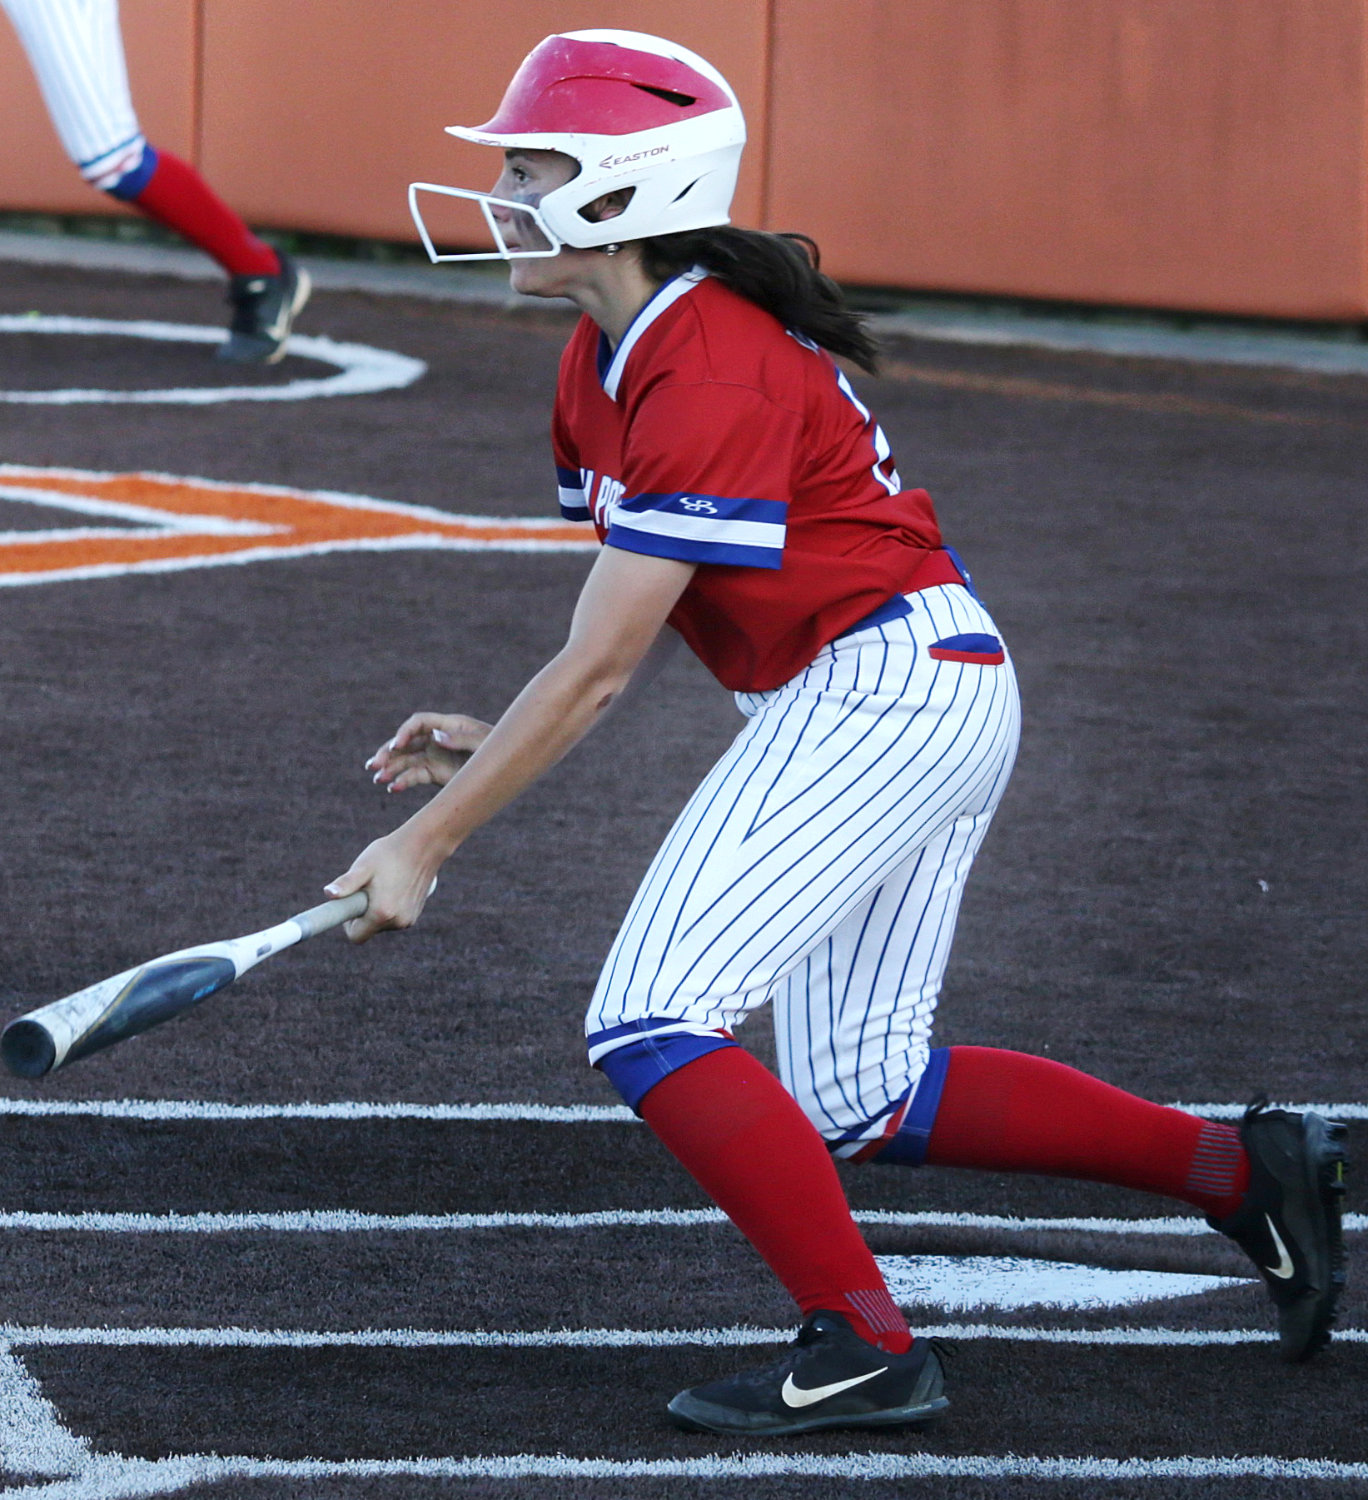 Alba-Golden's Rylee Wilcoxson delivers the game winning base hit in
the top of the eighth.